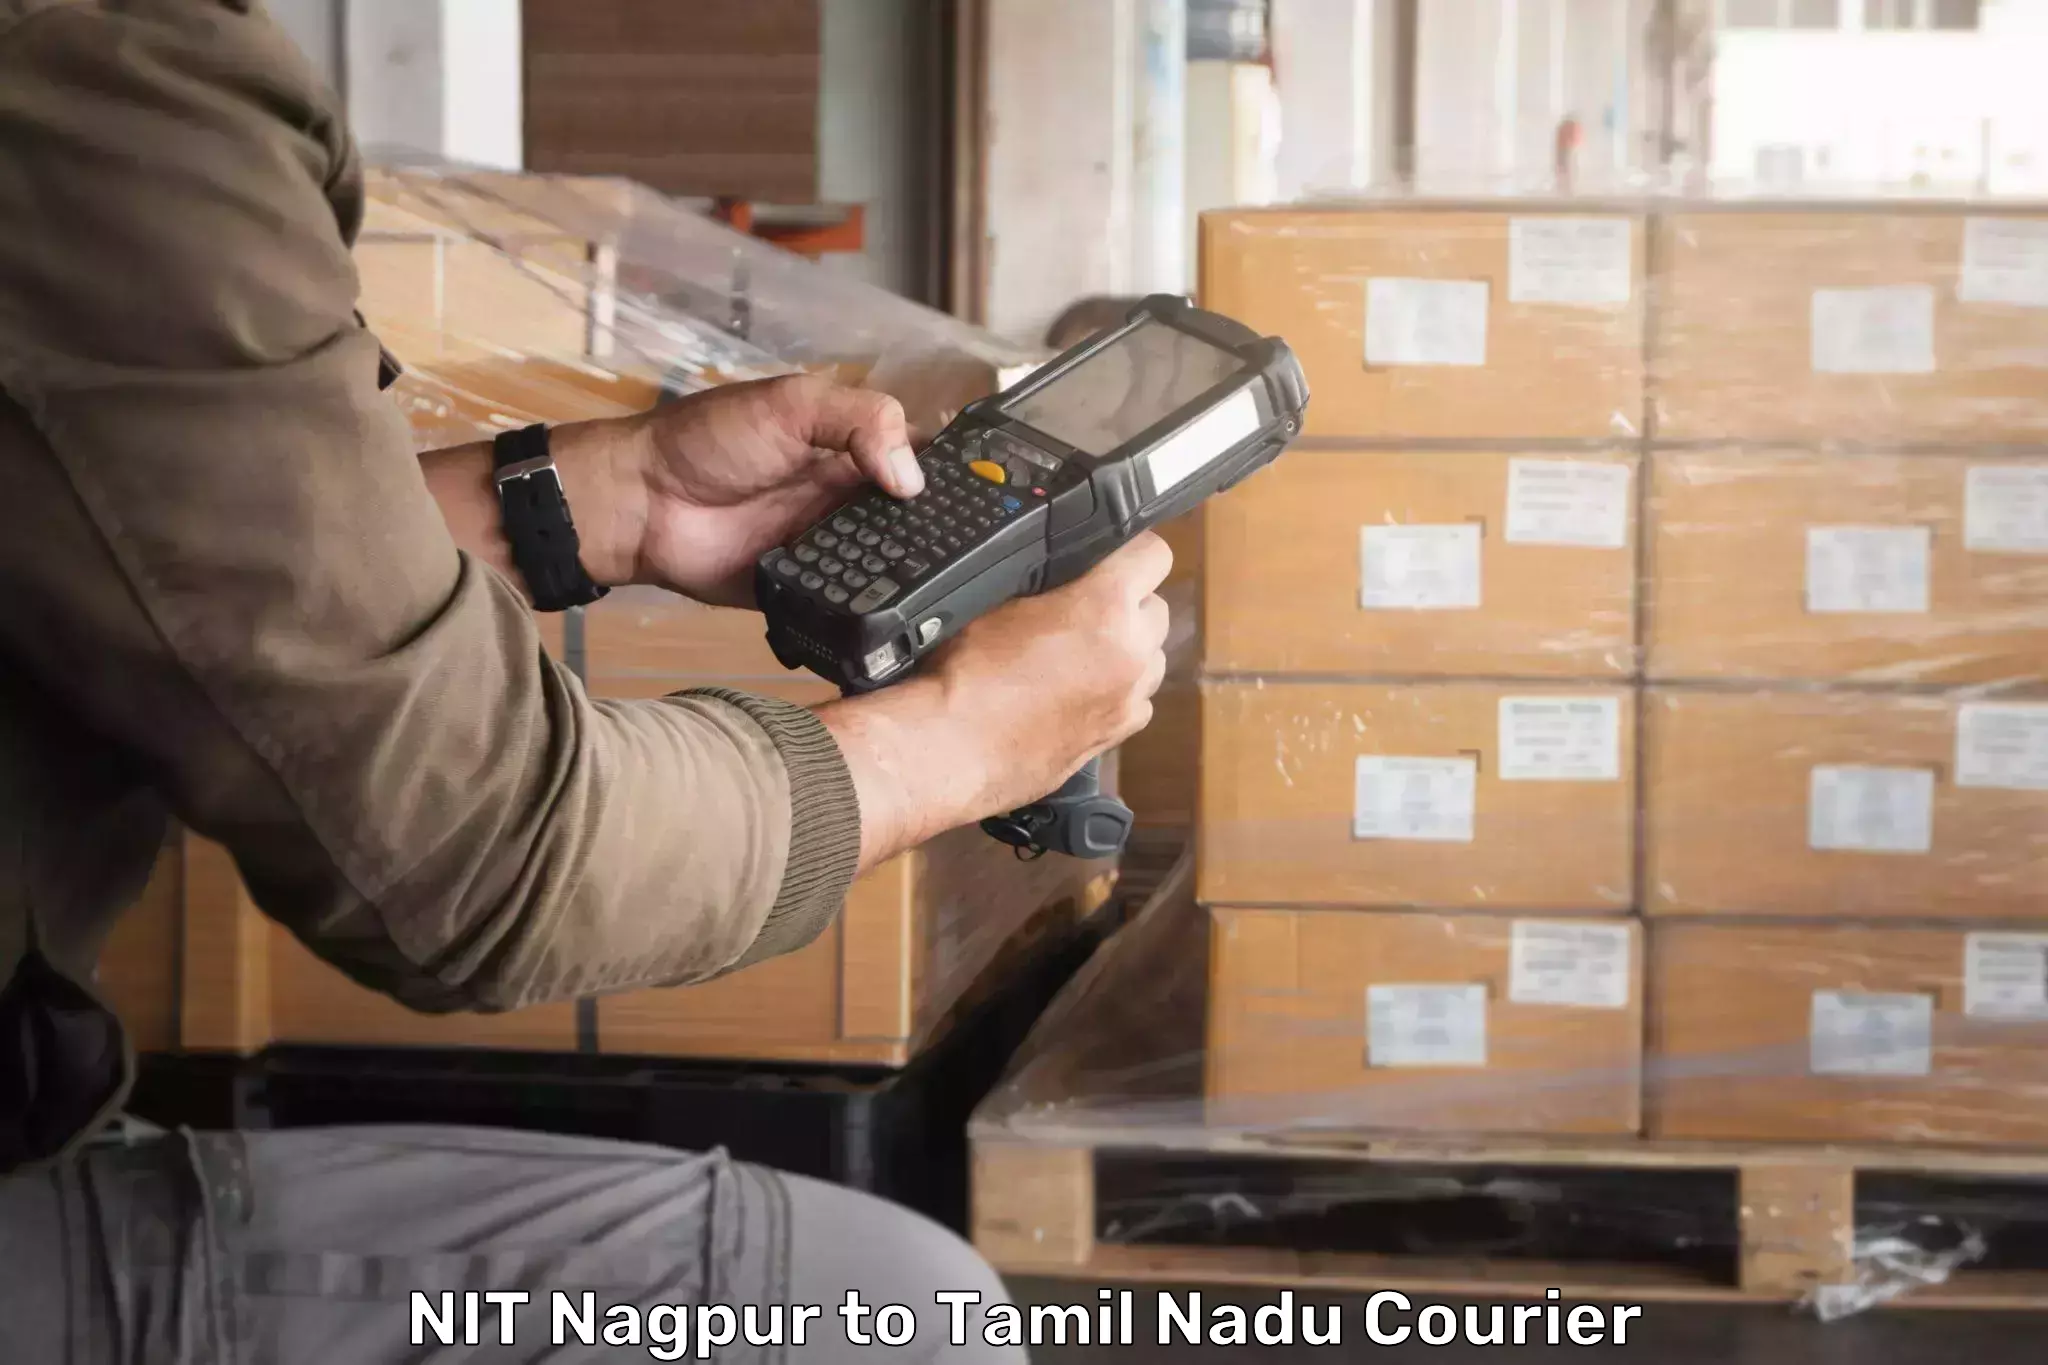 Reliable courier service NIT Nagpur to Coonoor